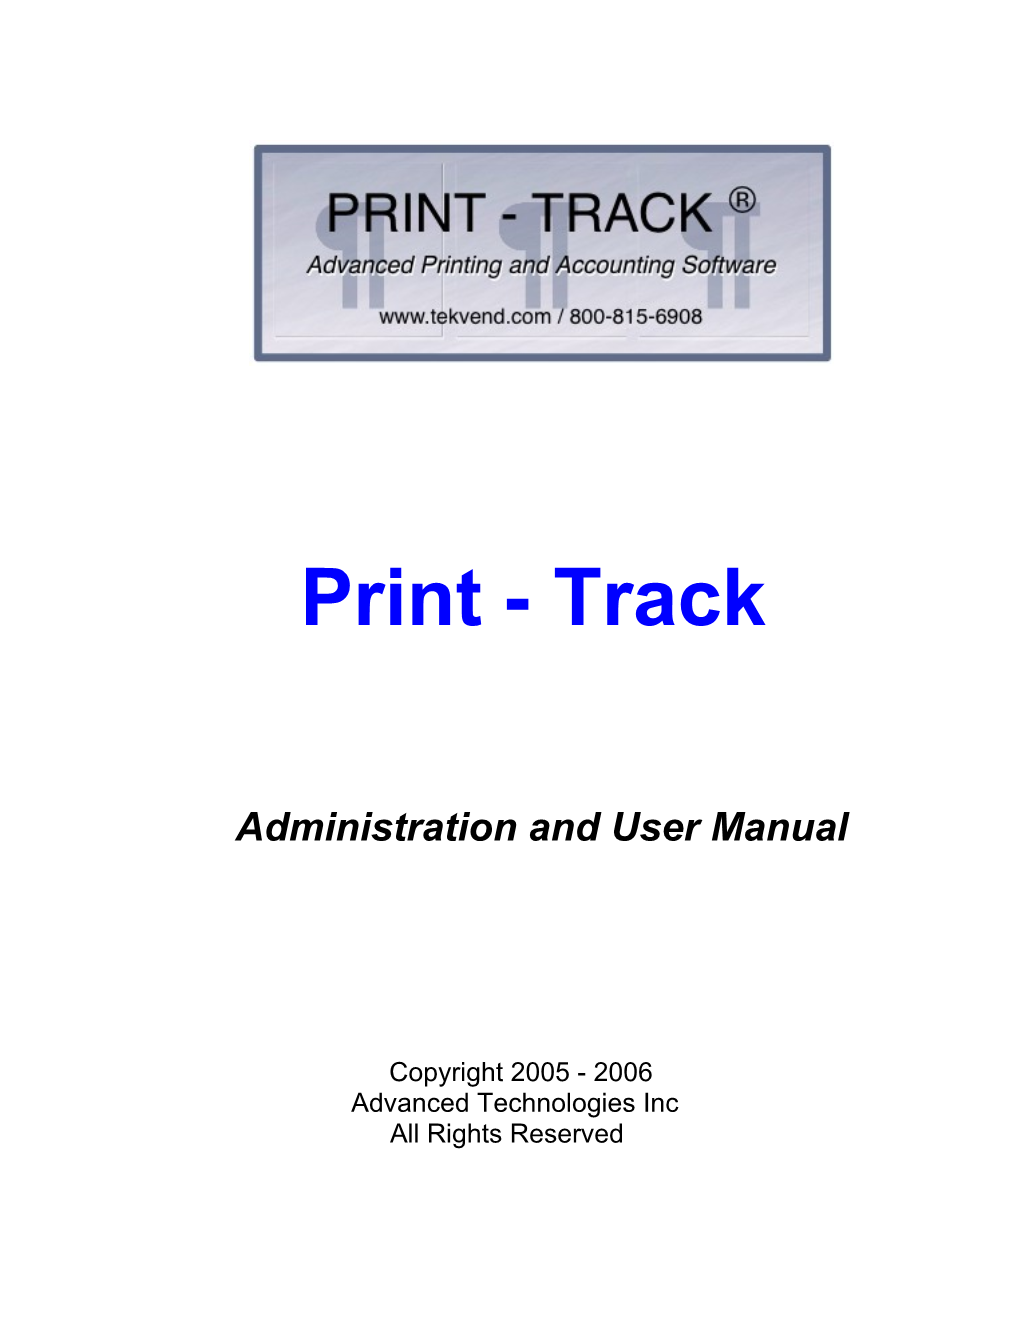 Administration and User Manual